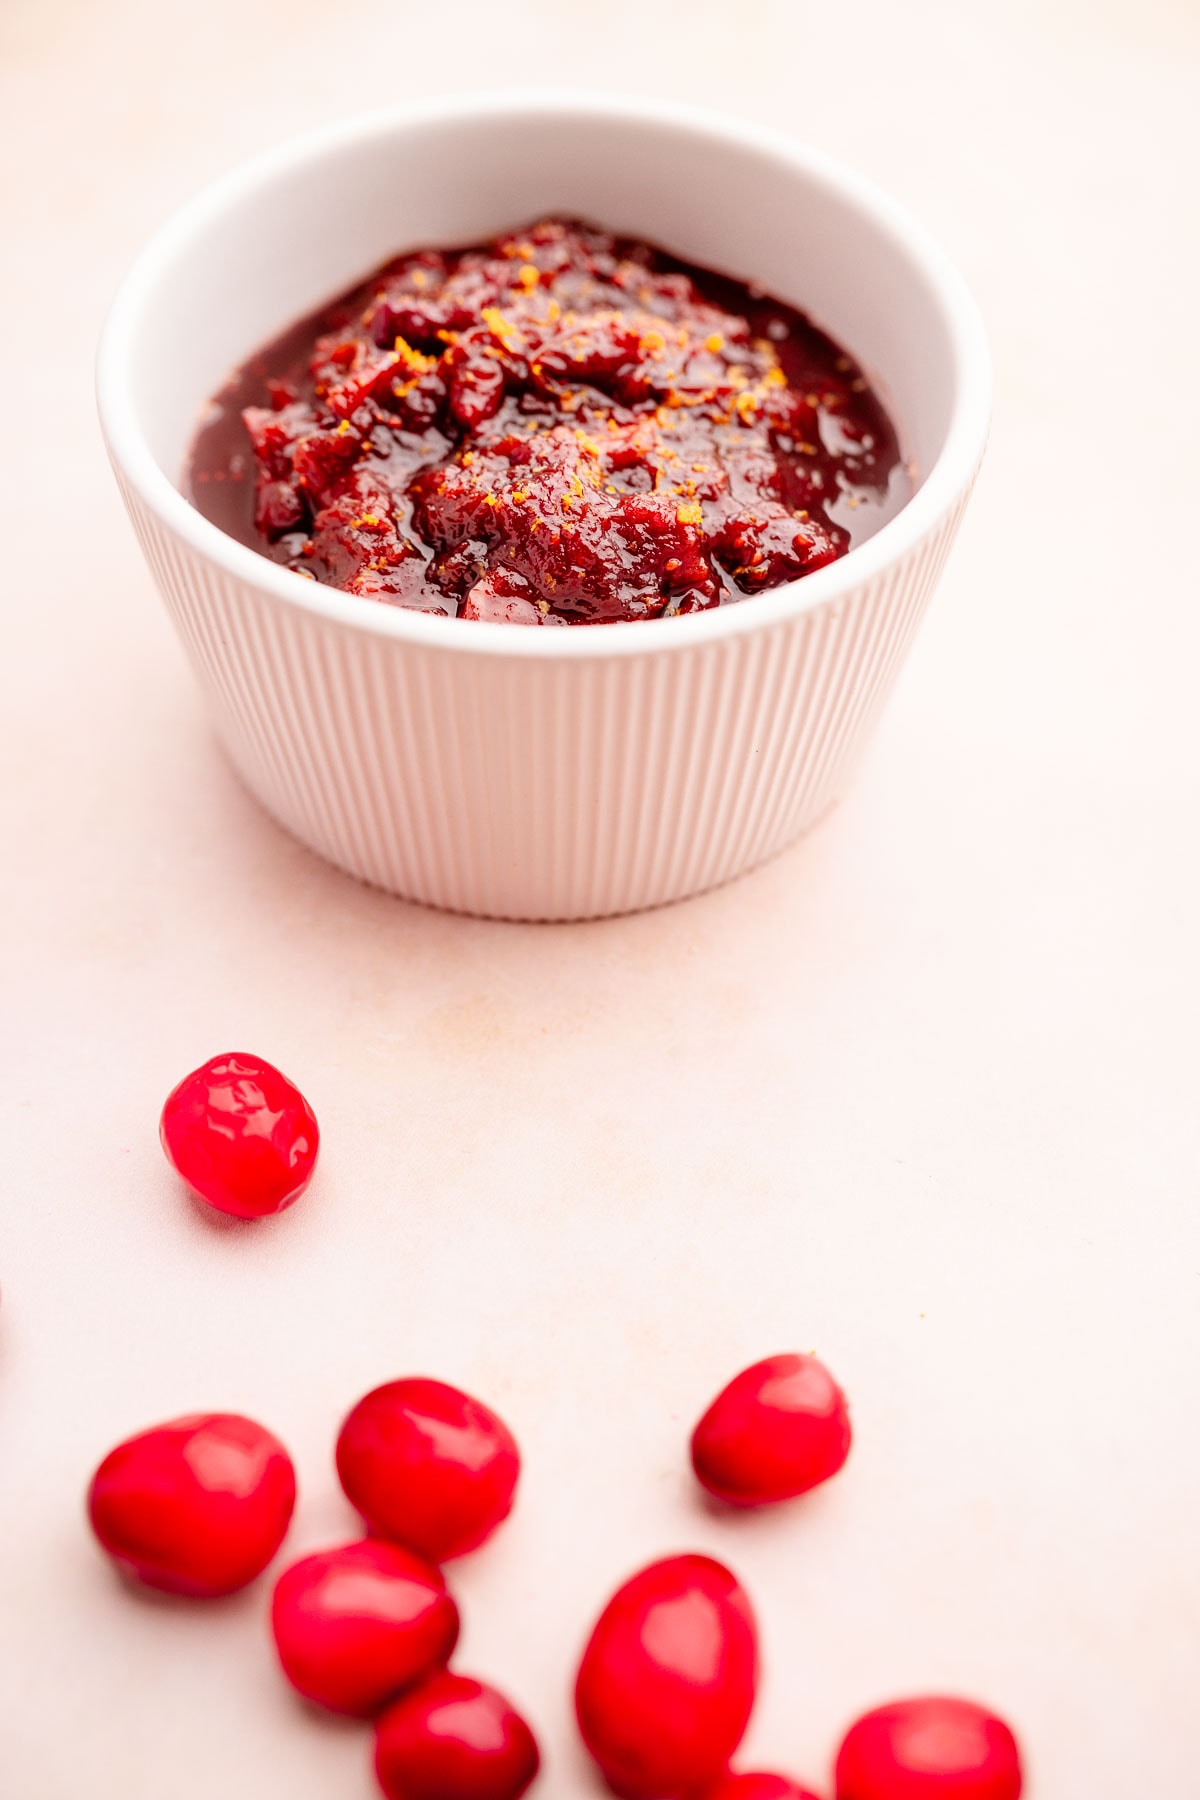 A slow cooker bowl of cranberry sauce surrounded by red berries.